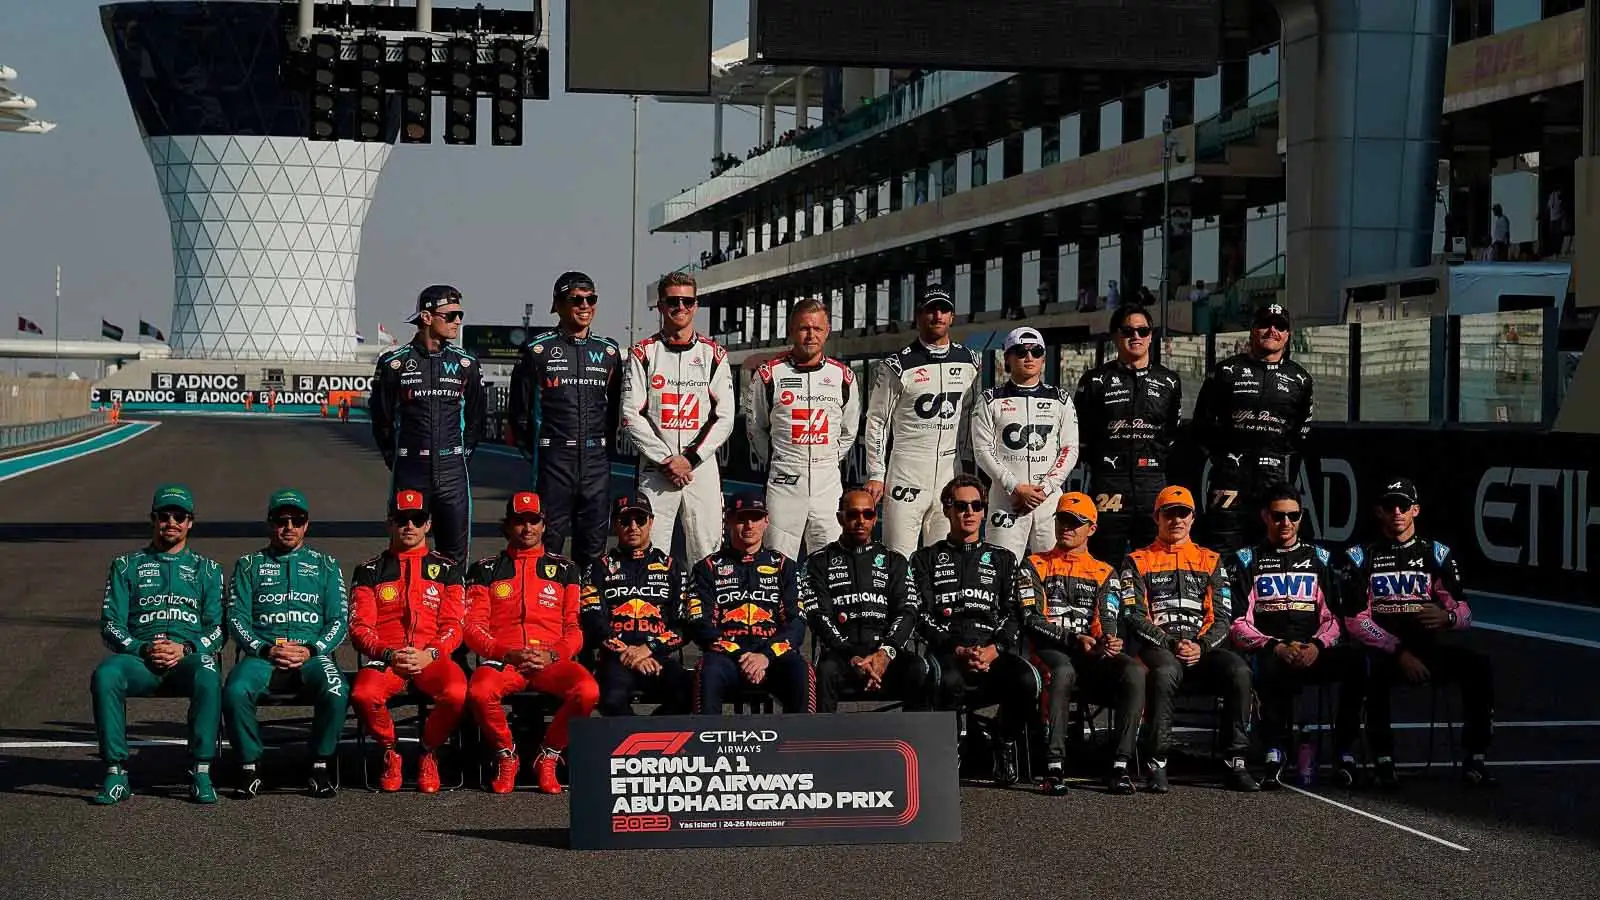 The F1 2023 grid pose for their annual end-of-season photo.